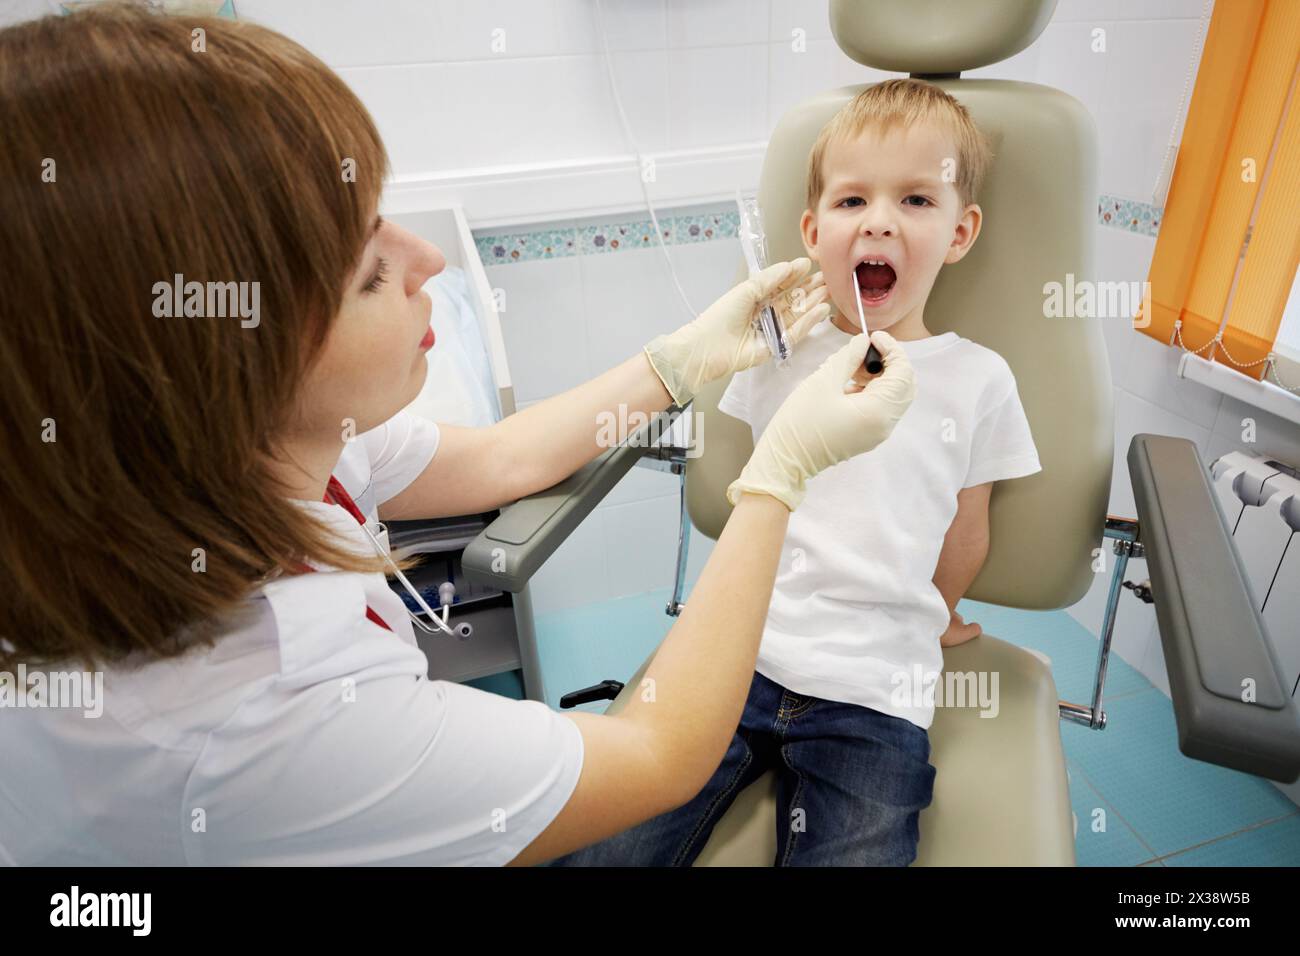 Doctor examines mouth of child sitting in medical armchair. Stock Photo